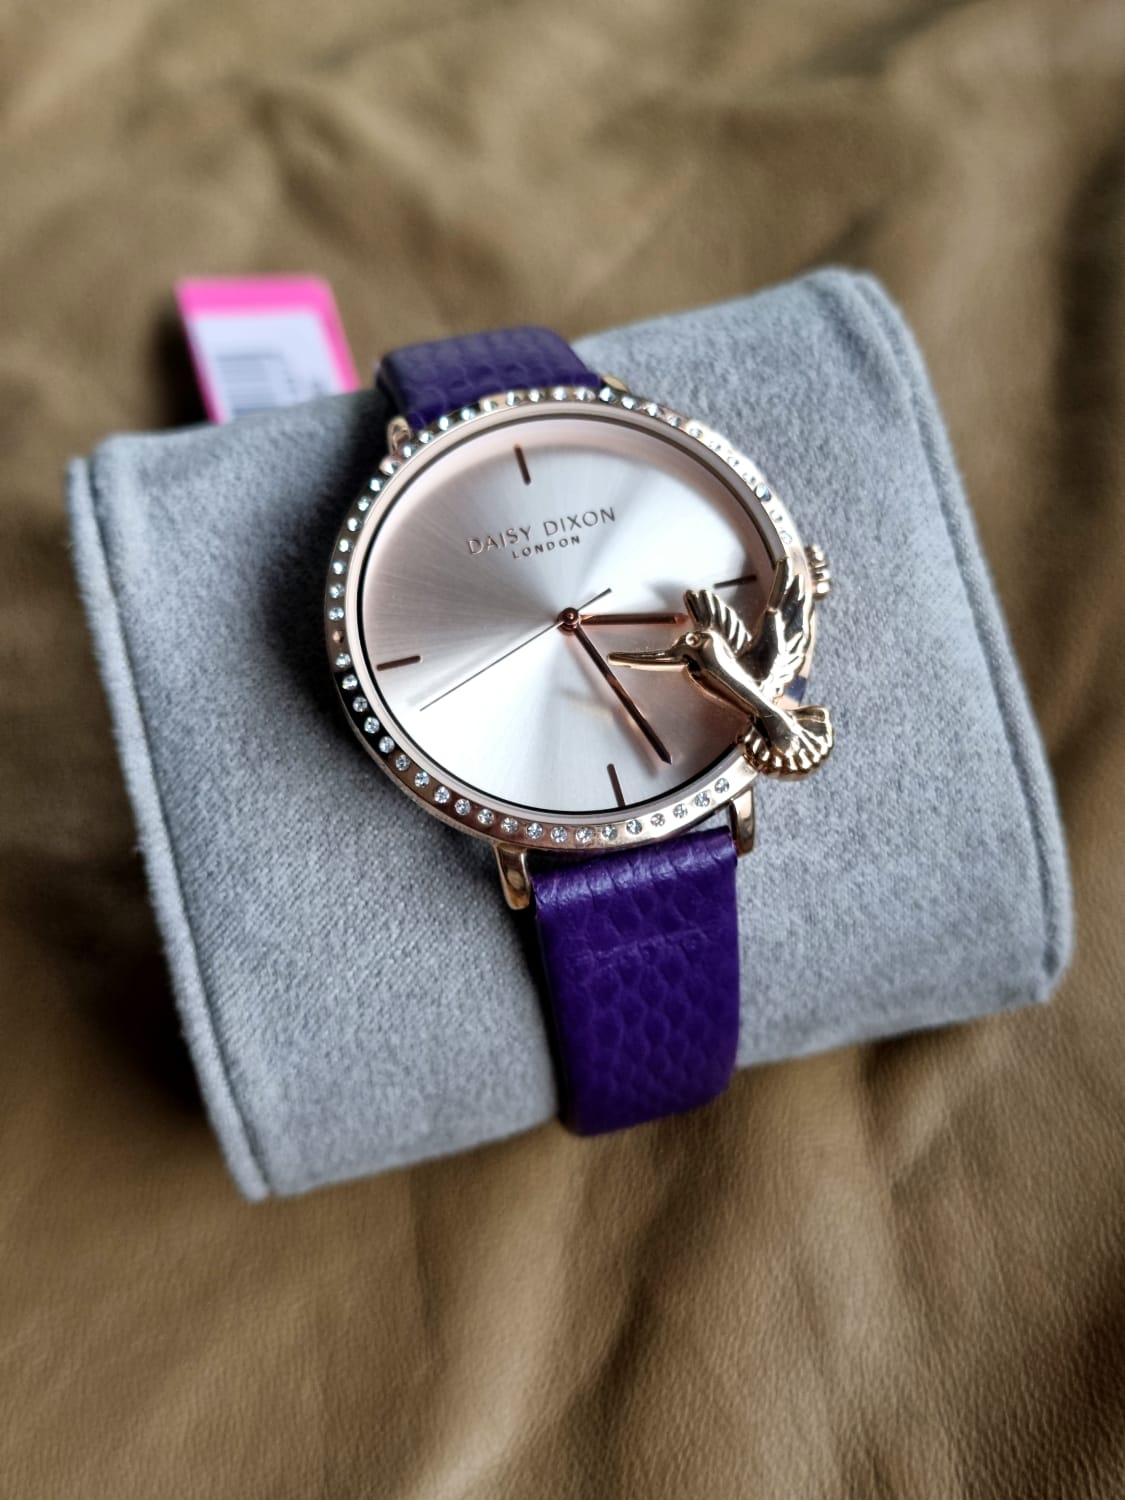 Daisy Dixon London Kendall #16 Analogue Quartz Watch With Purple Strap And Rose Gold Case – D Dd148vrg